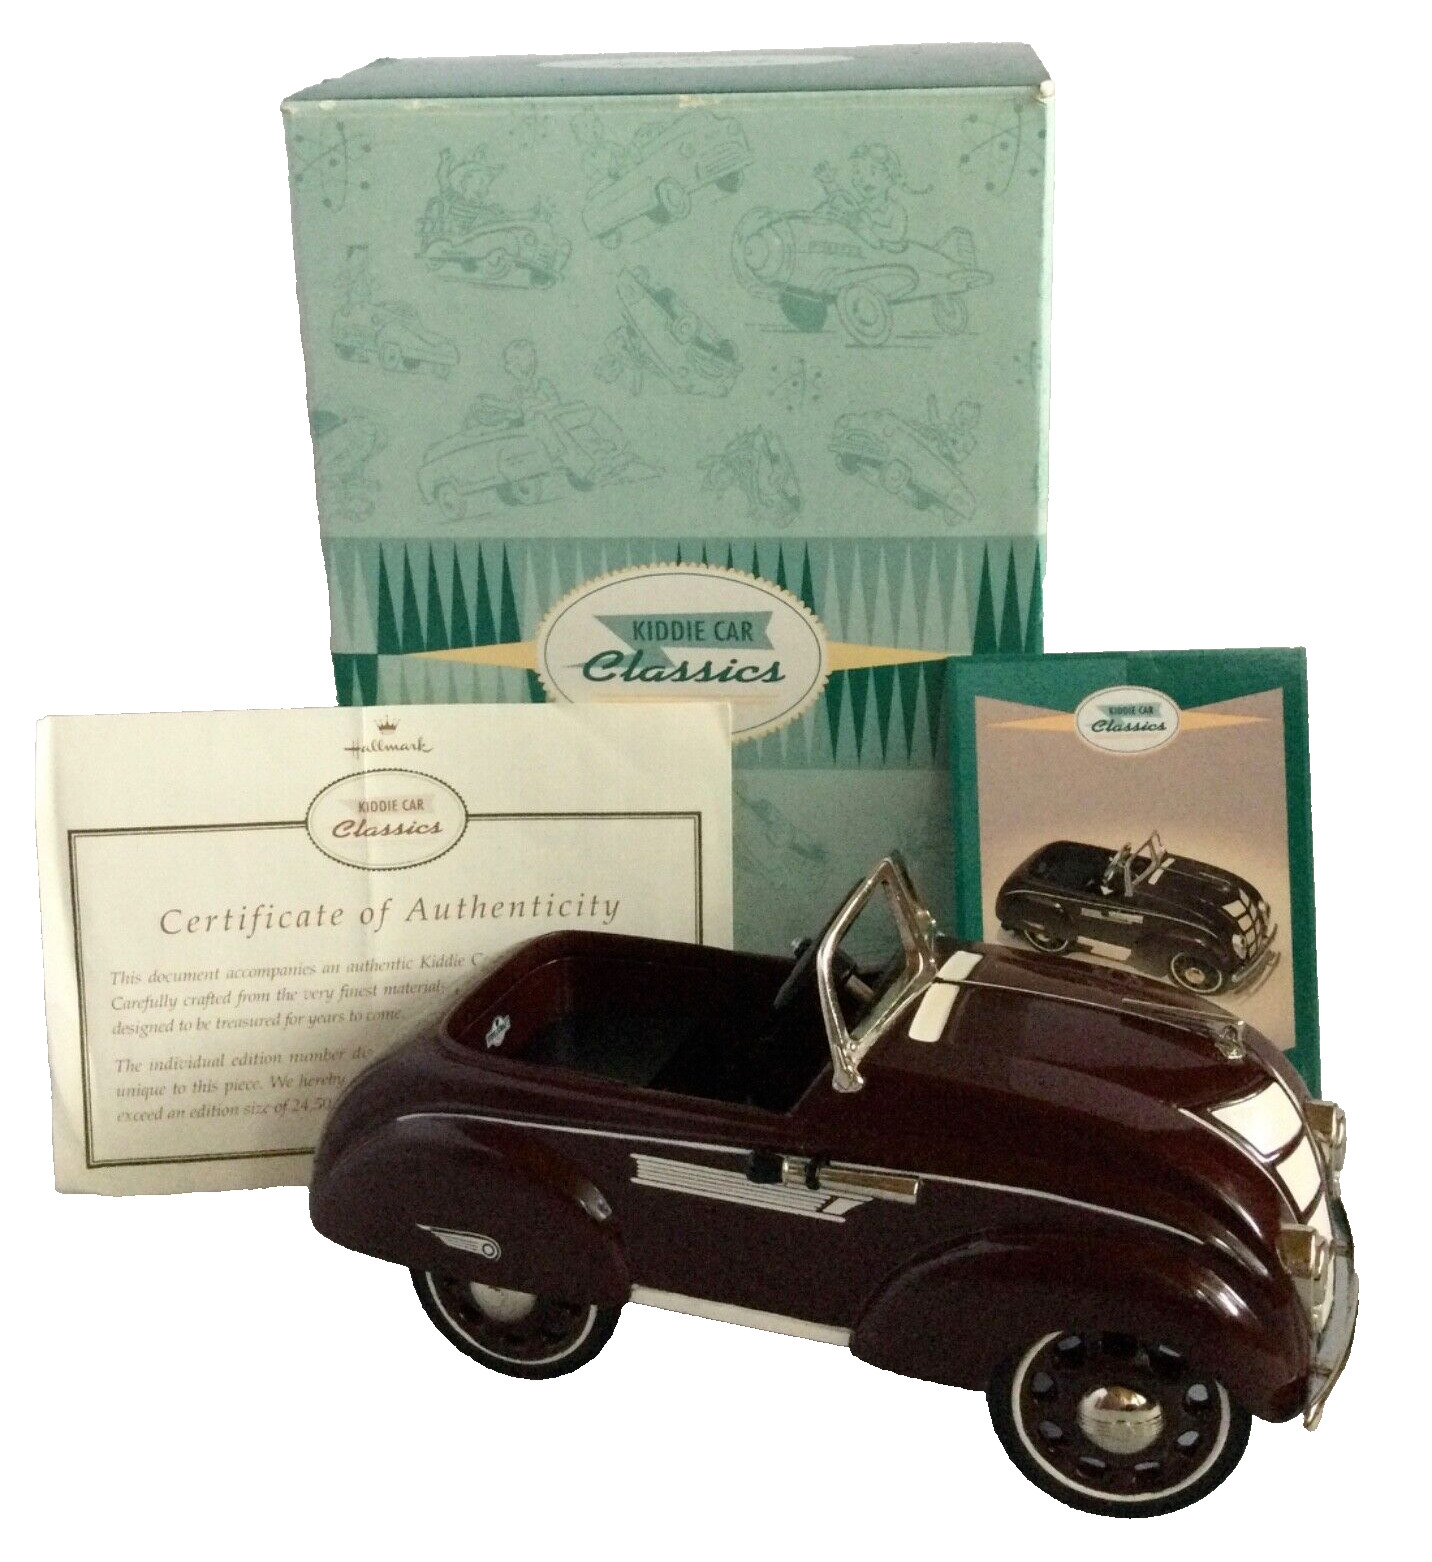 Hallmark Kiddie Car classic 1937 SteelCraft Airflow by Murray With COA and Box